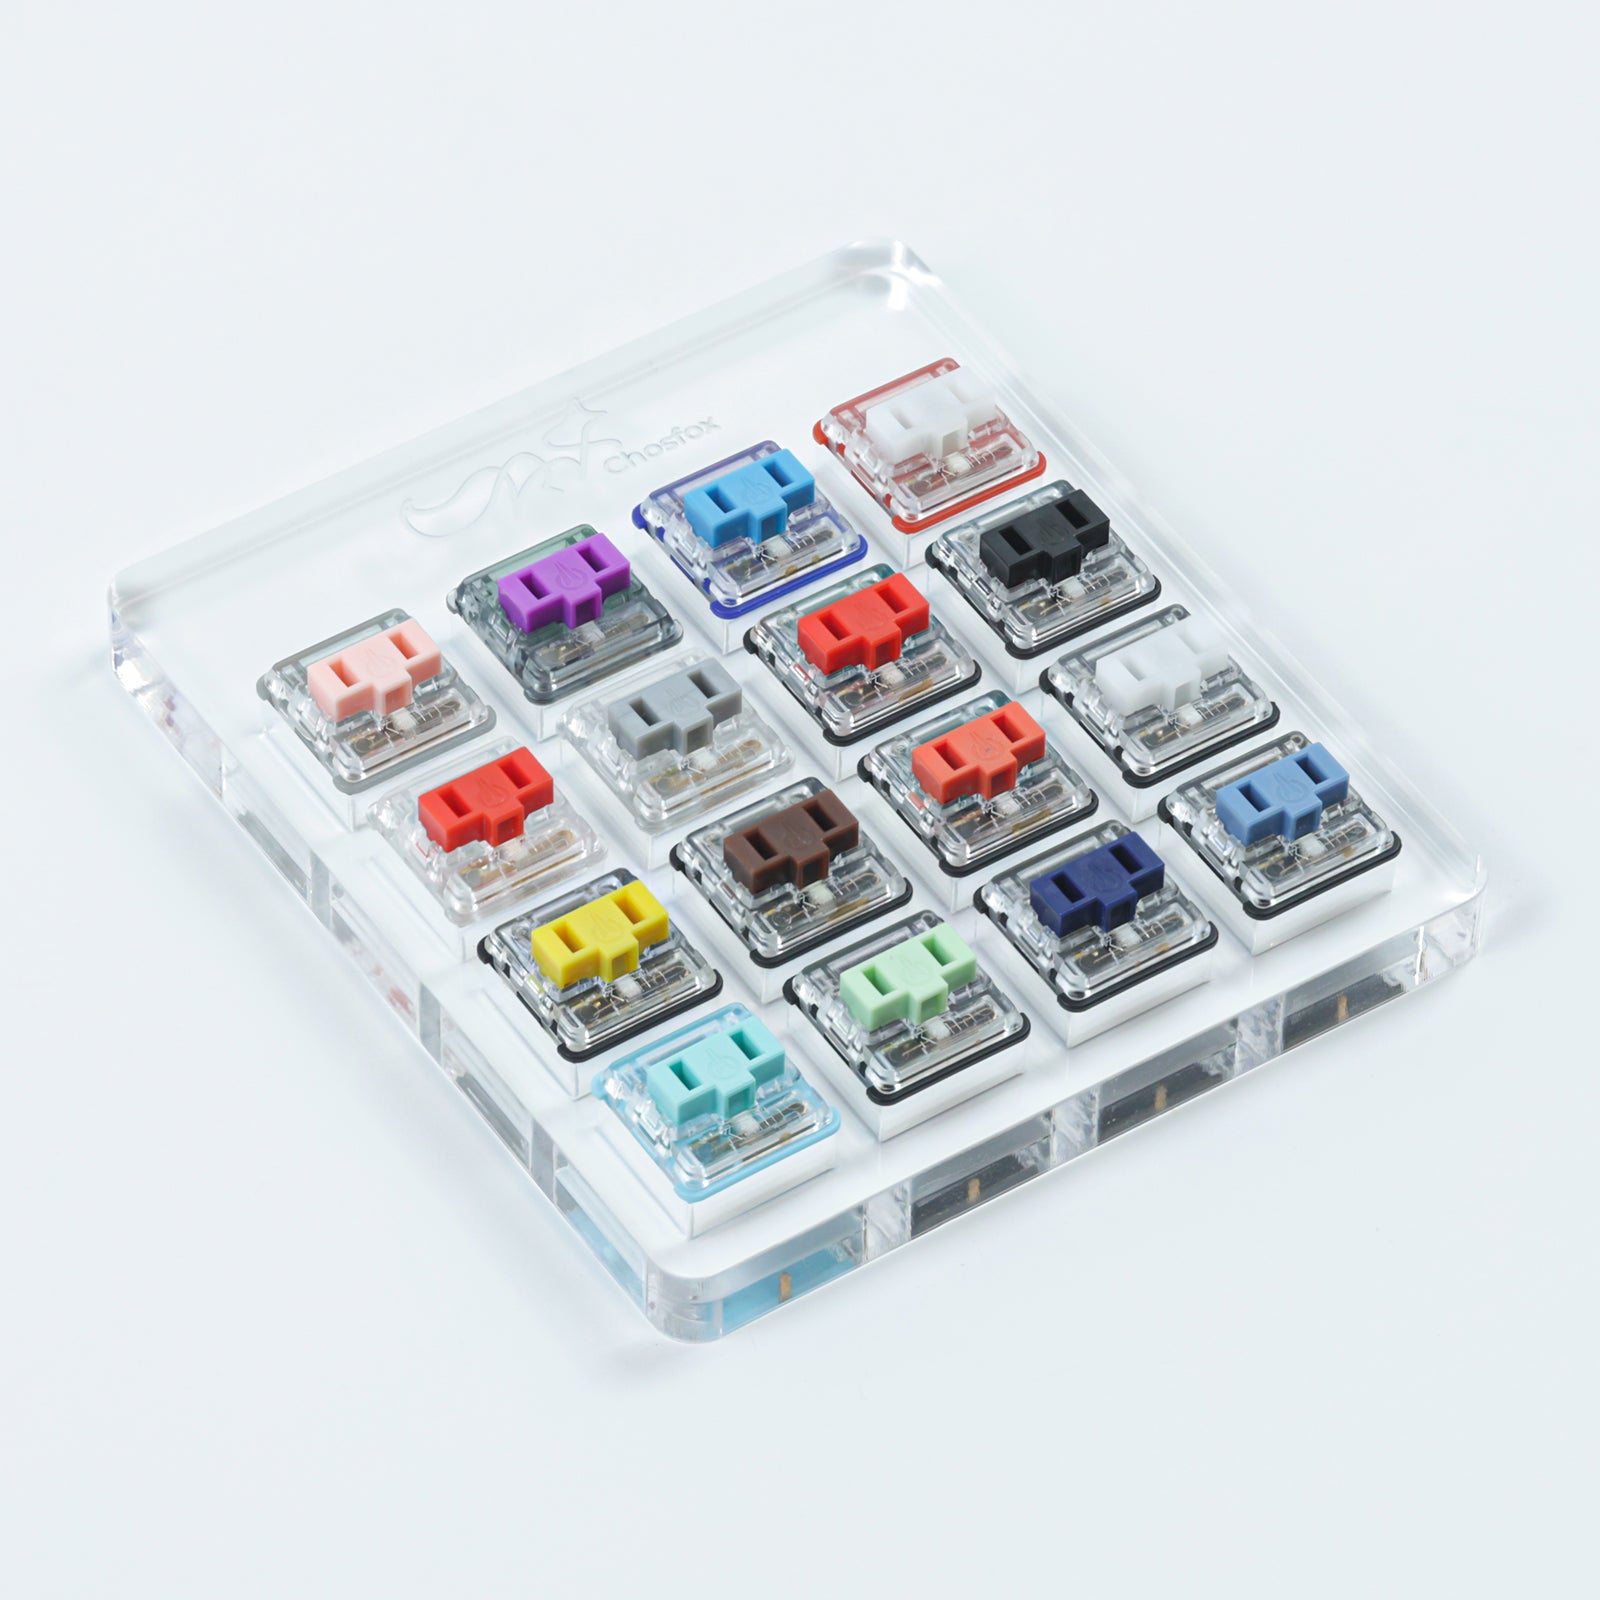 Kailh Choc Switches Tester-Chosfox